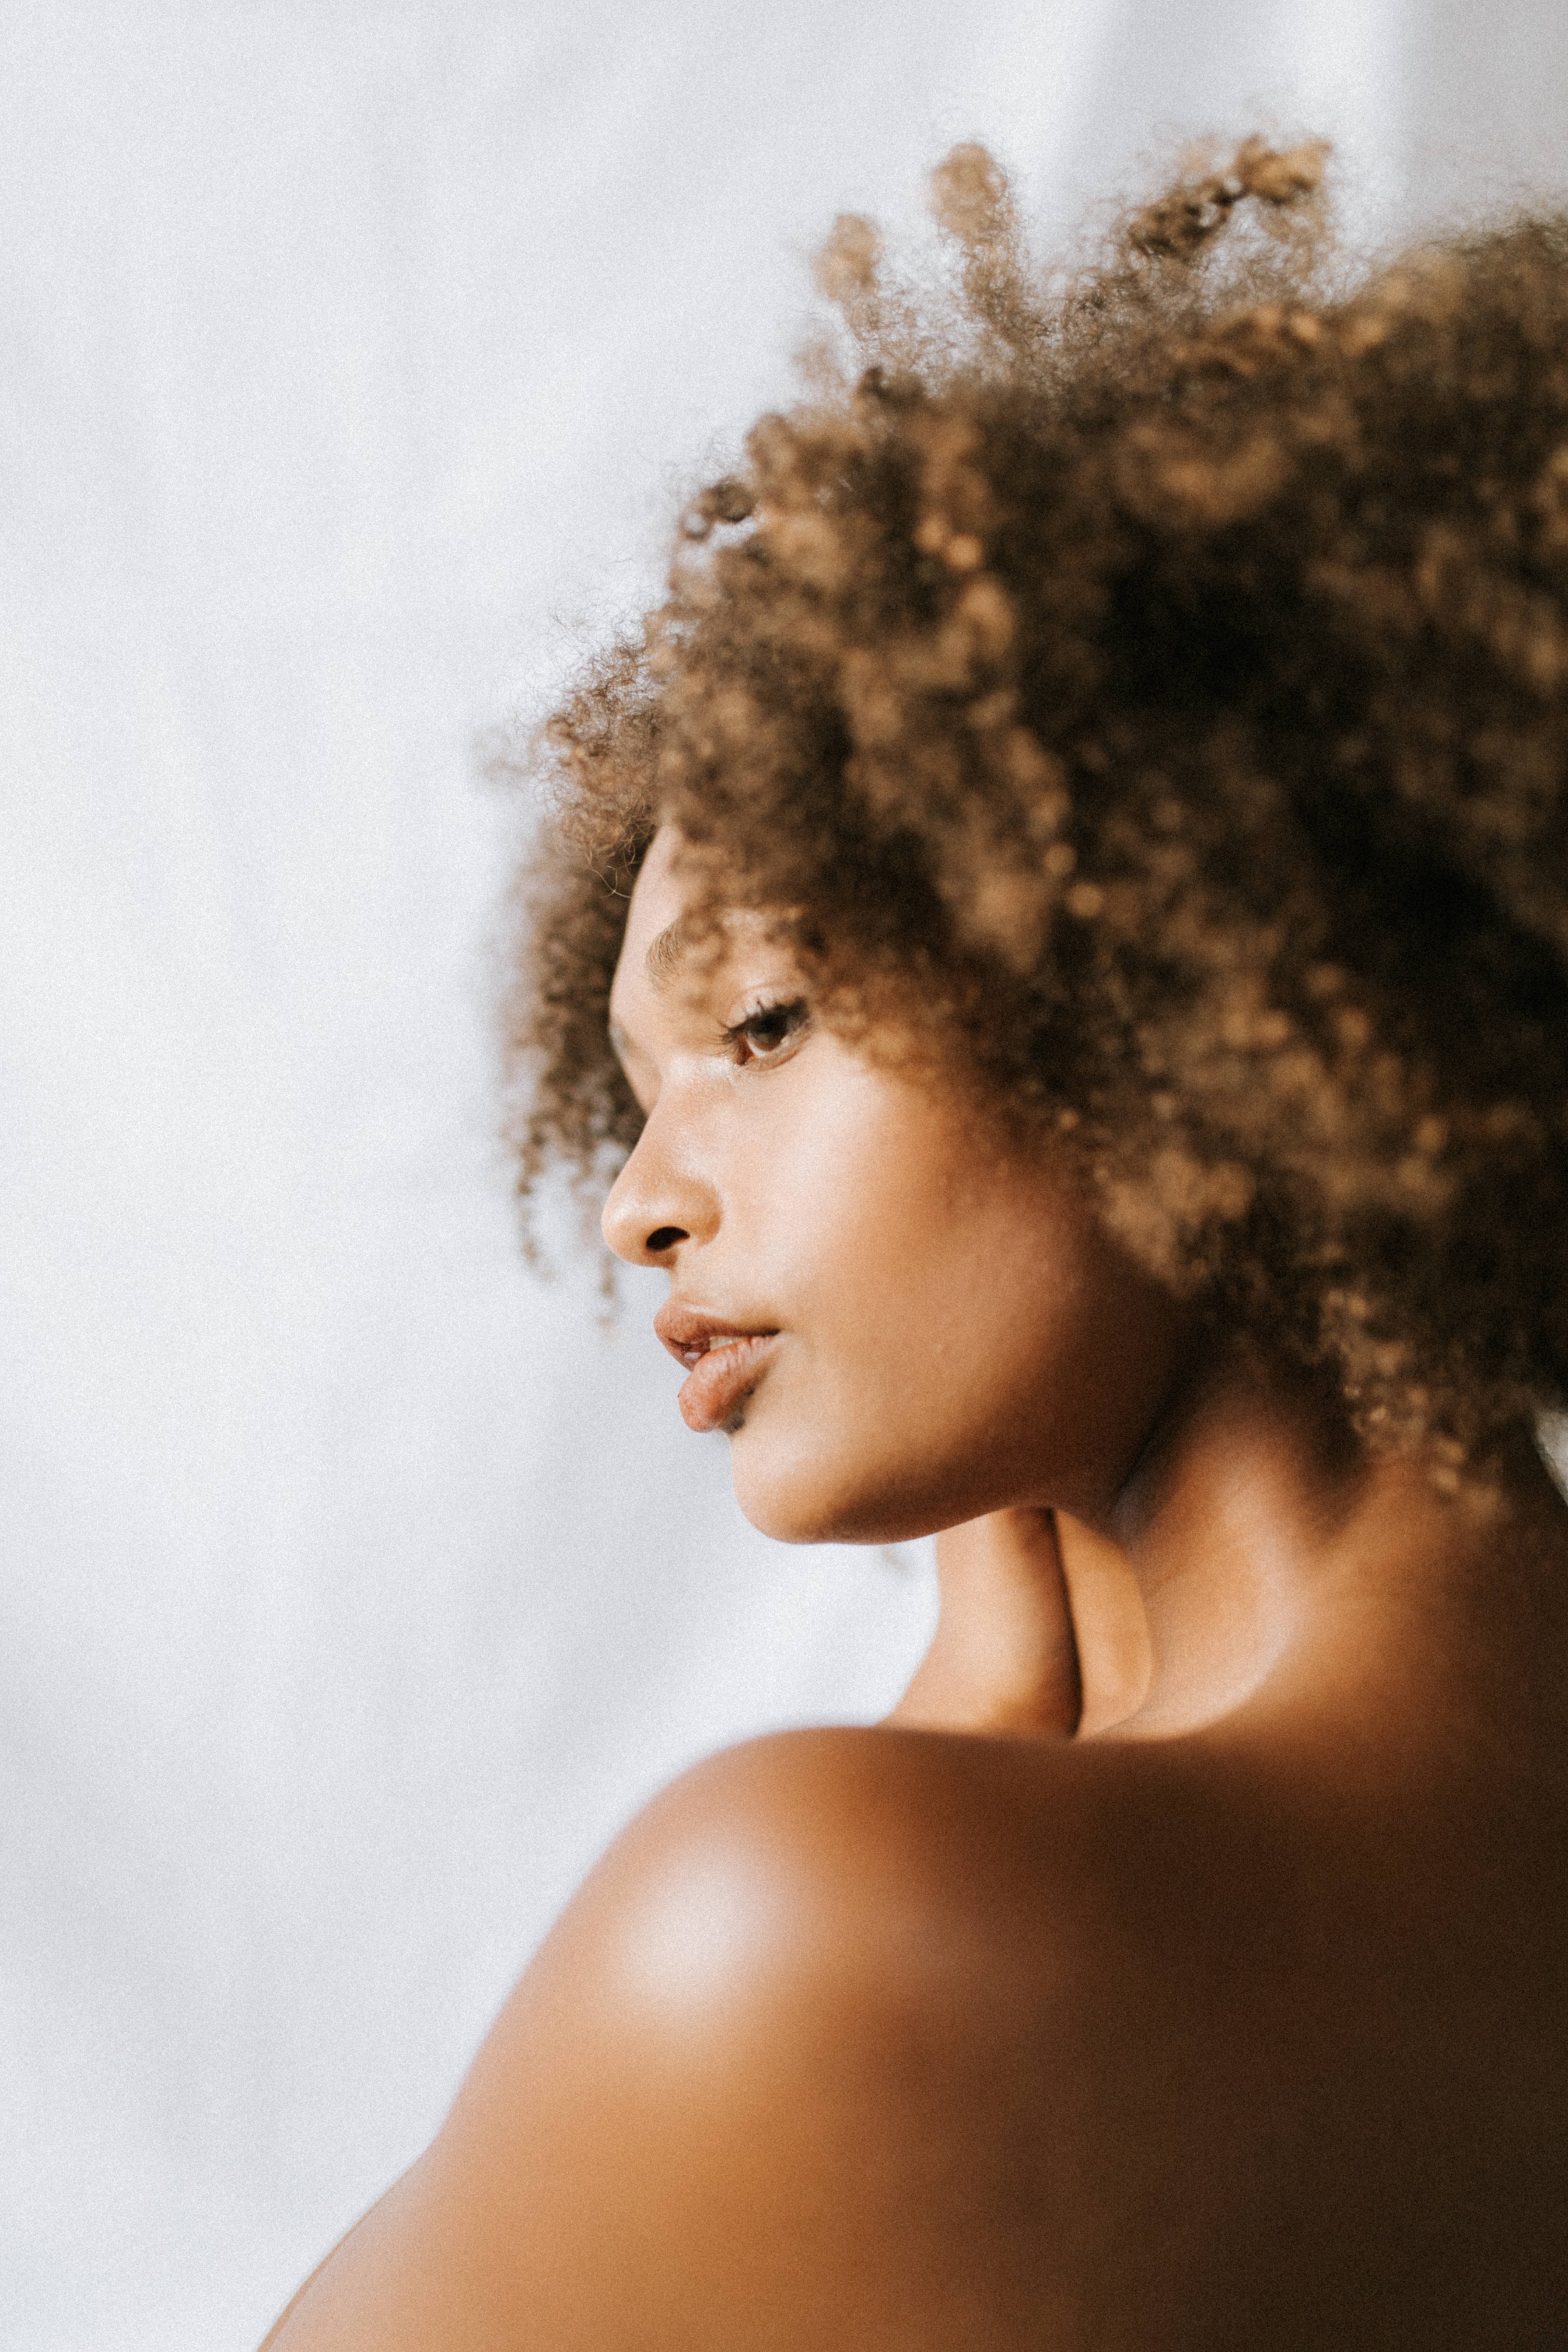 black woman with natural curly hair